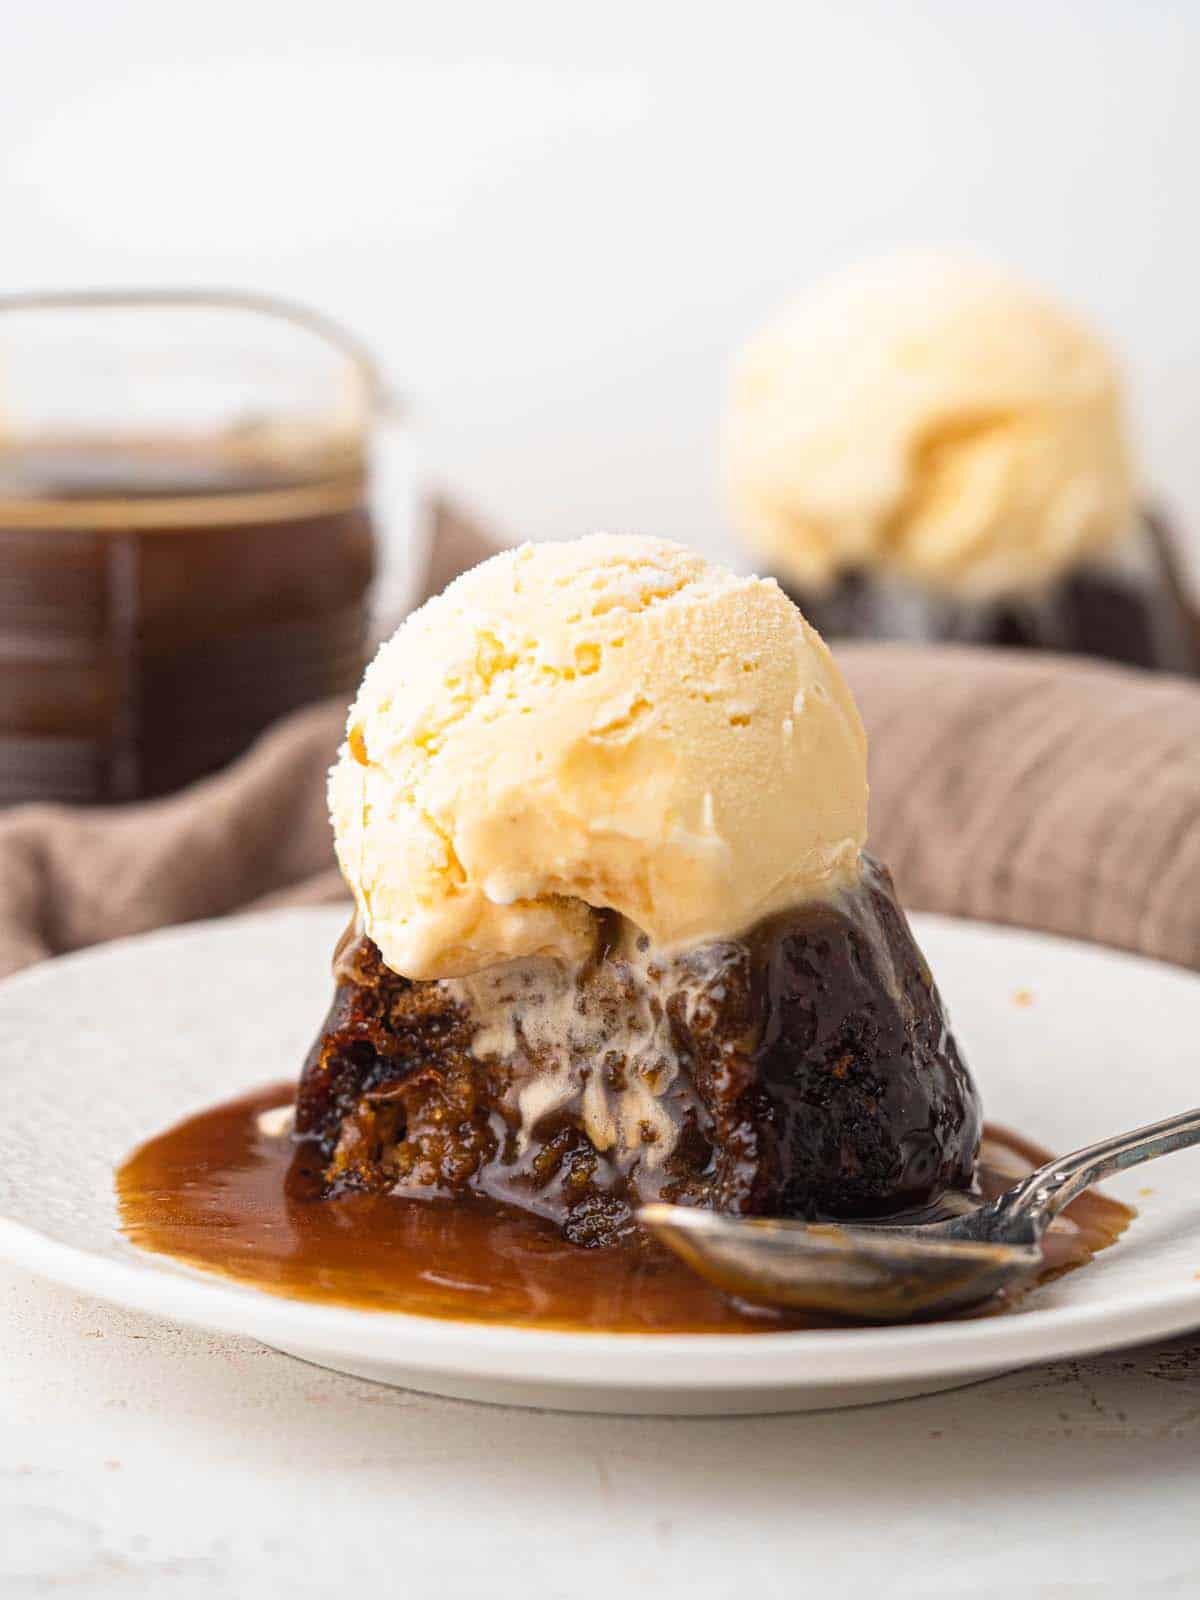 Sticky toffee pudding topped with butterscotch sauce and ice cream